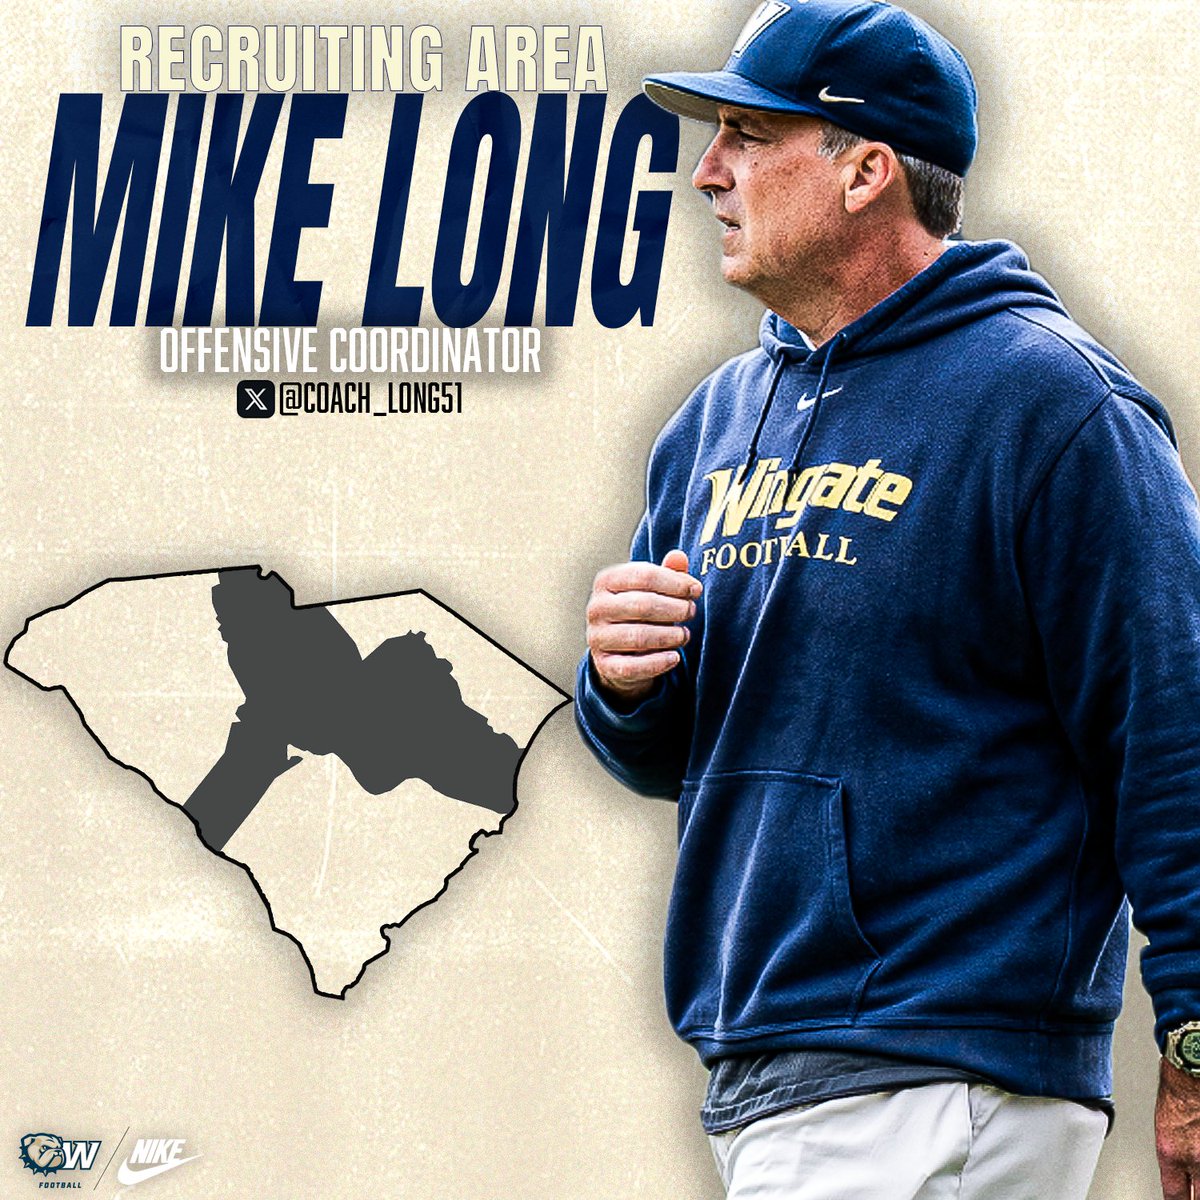 ‼️RECRUITING AREA‼️ Wingate's Offensive Coordinator, @Coach_Long51 is ready to find some future bulldogs! #OneDog